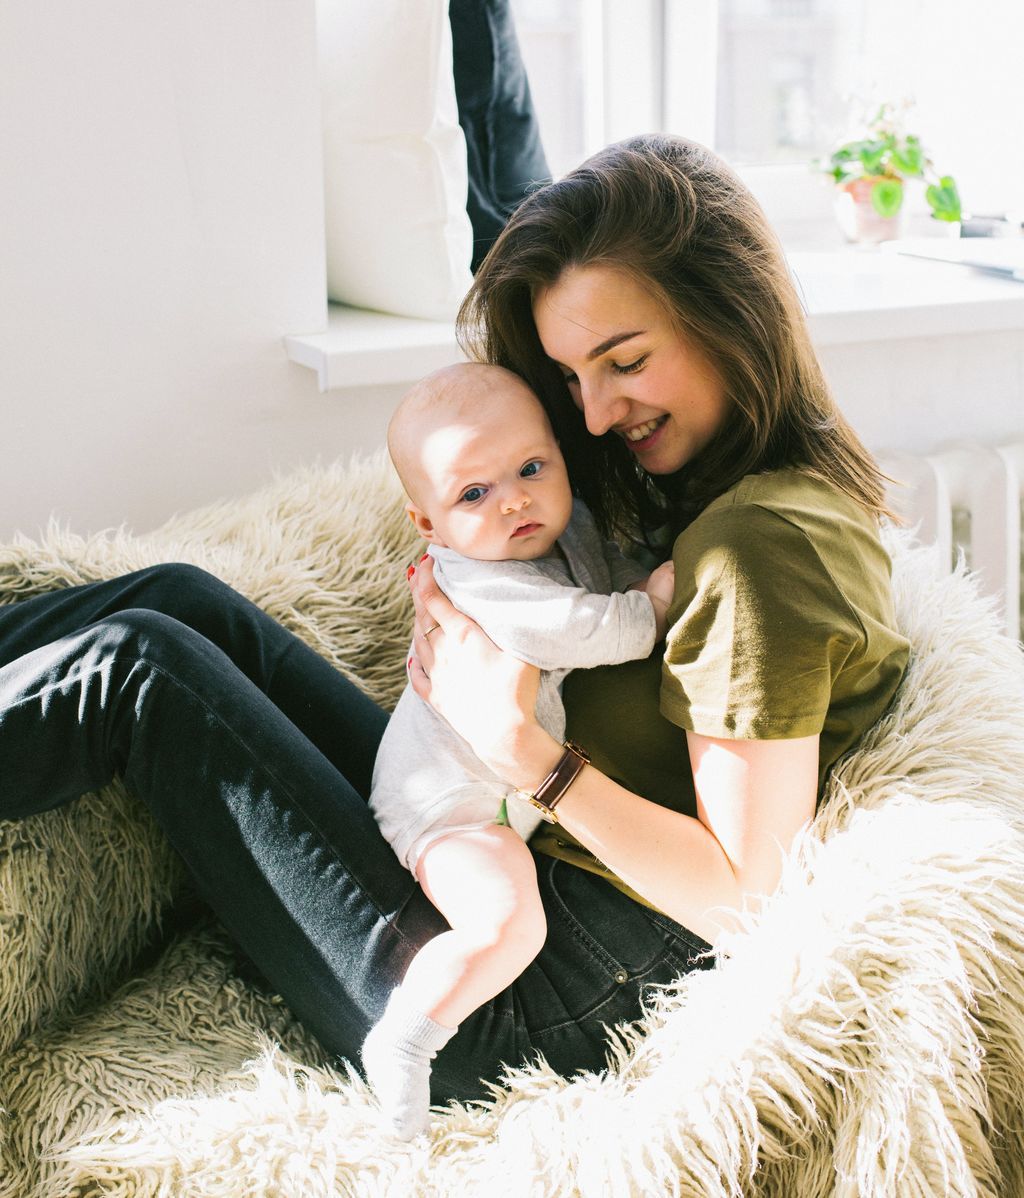 woman-in-green-shirt-holding-baby-while-sitting-698877